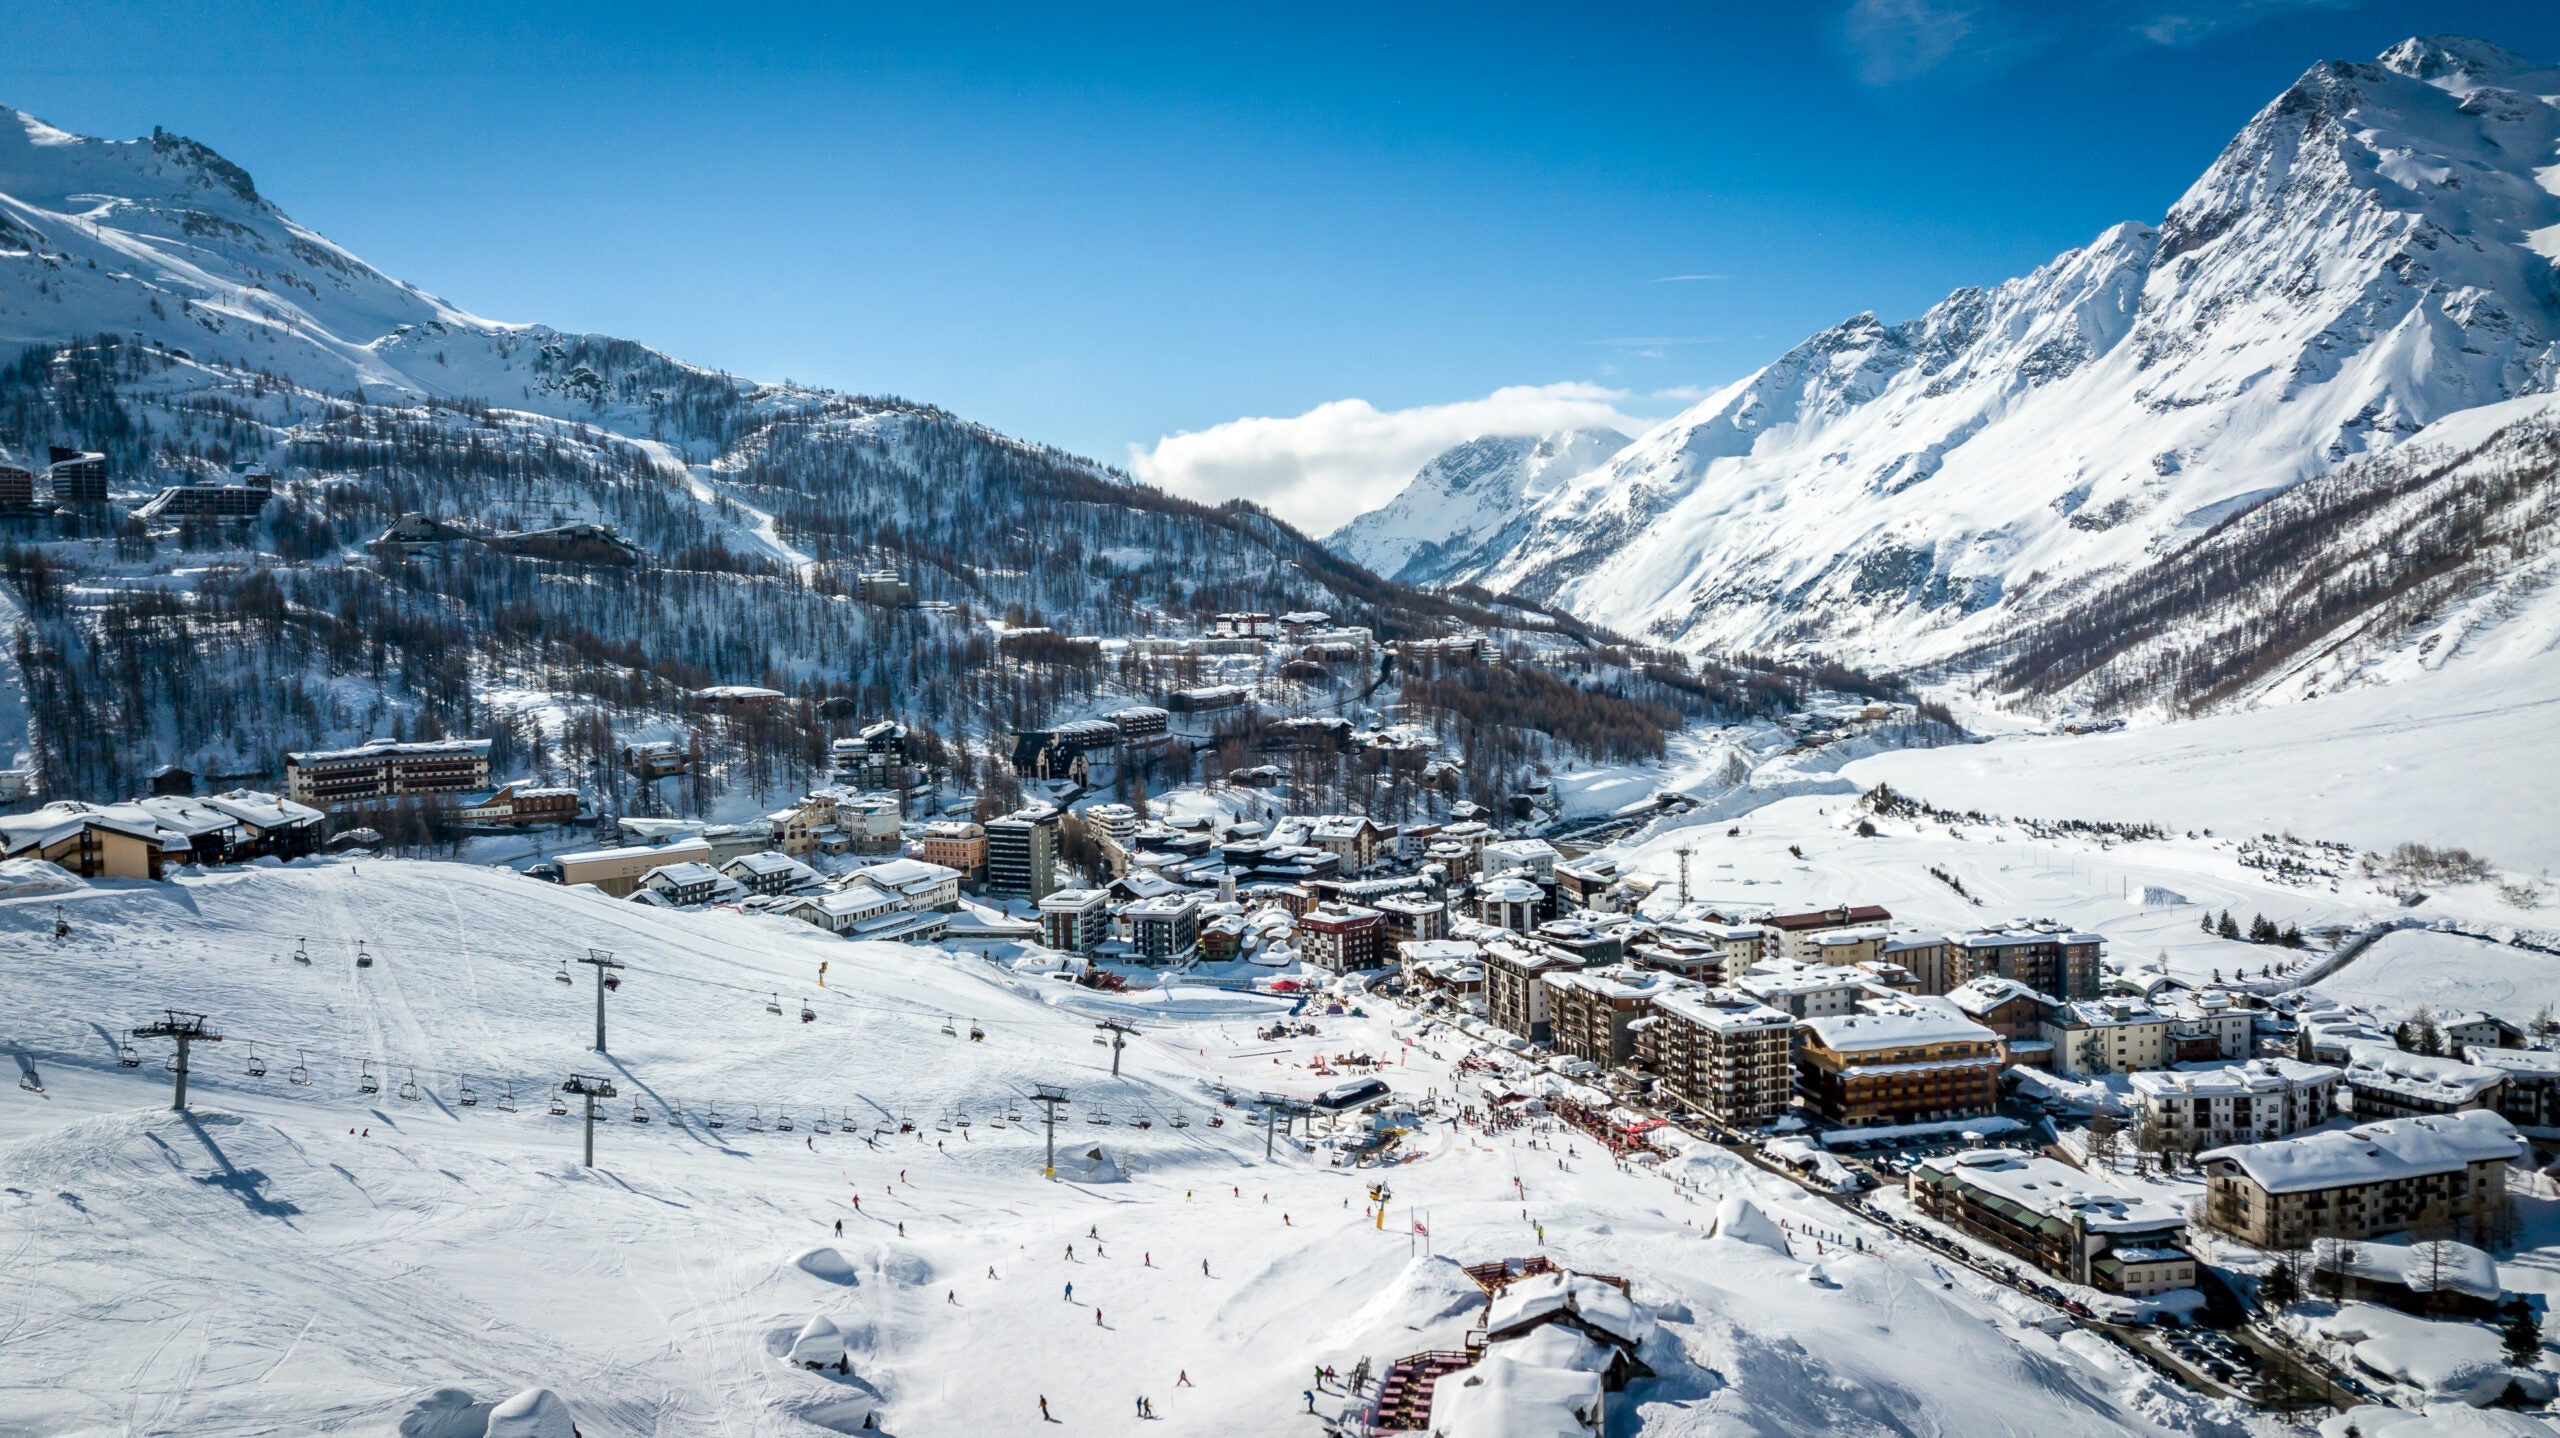 Italy has added new COVID-19 measures that could affect your winter trip